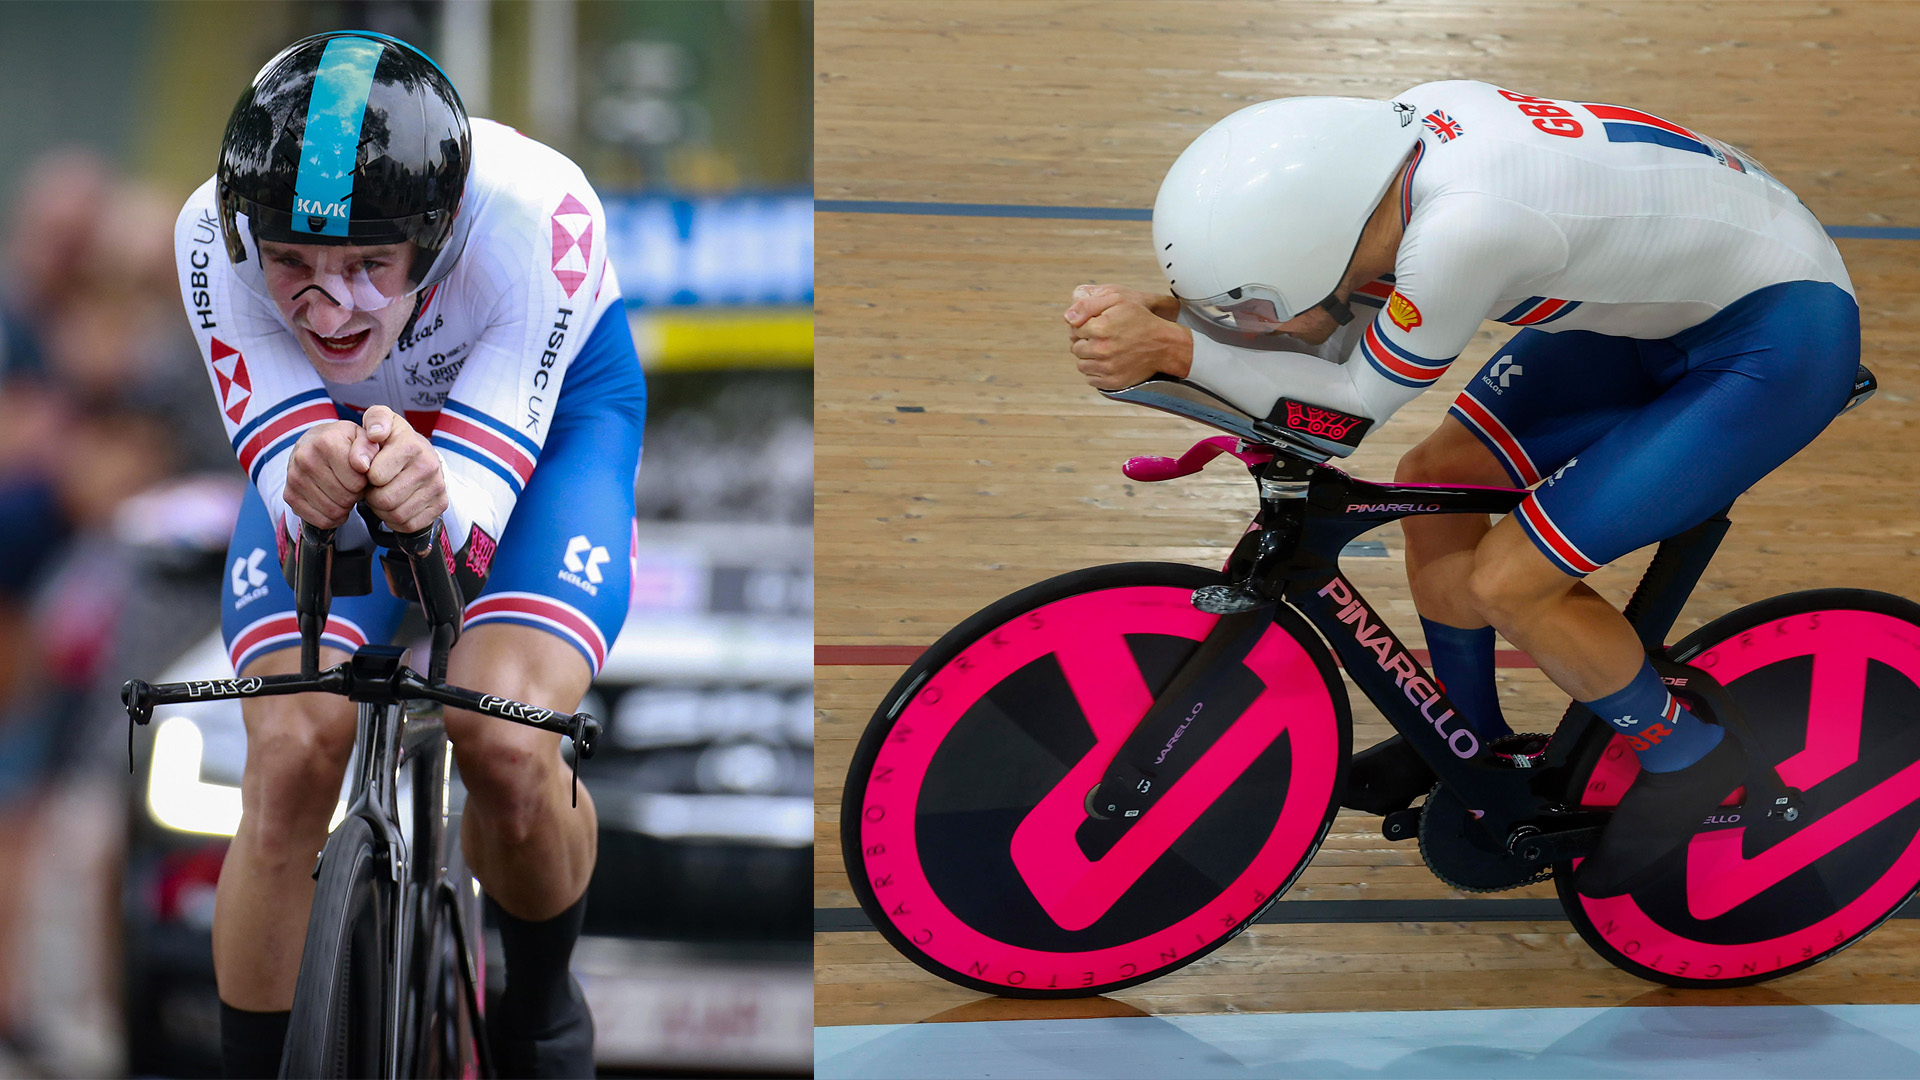 This image is split vertically down the middle and features two images of Dan Bigham left and right comparing his outdoor road time trial position to his indoor track pursuit position. On the left, Bigham is seen time trialling for Great Britain at the 2021 UCI Time Trial World Championships on the road in Belgium. The image is head on and it is clear Bigham has a line of sight straight ahead of himself and as such he can see where he is going. On the right, the image from an indoor velodrome pursuit race on the track it is much less obvious if Bigham can see where he is going. His face is practically touching his forearms and it appears as though he is looking at the ground rather than ahead of himself.